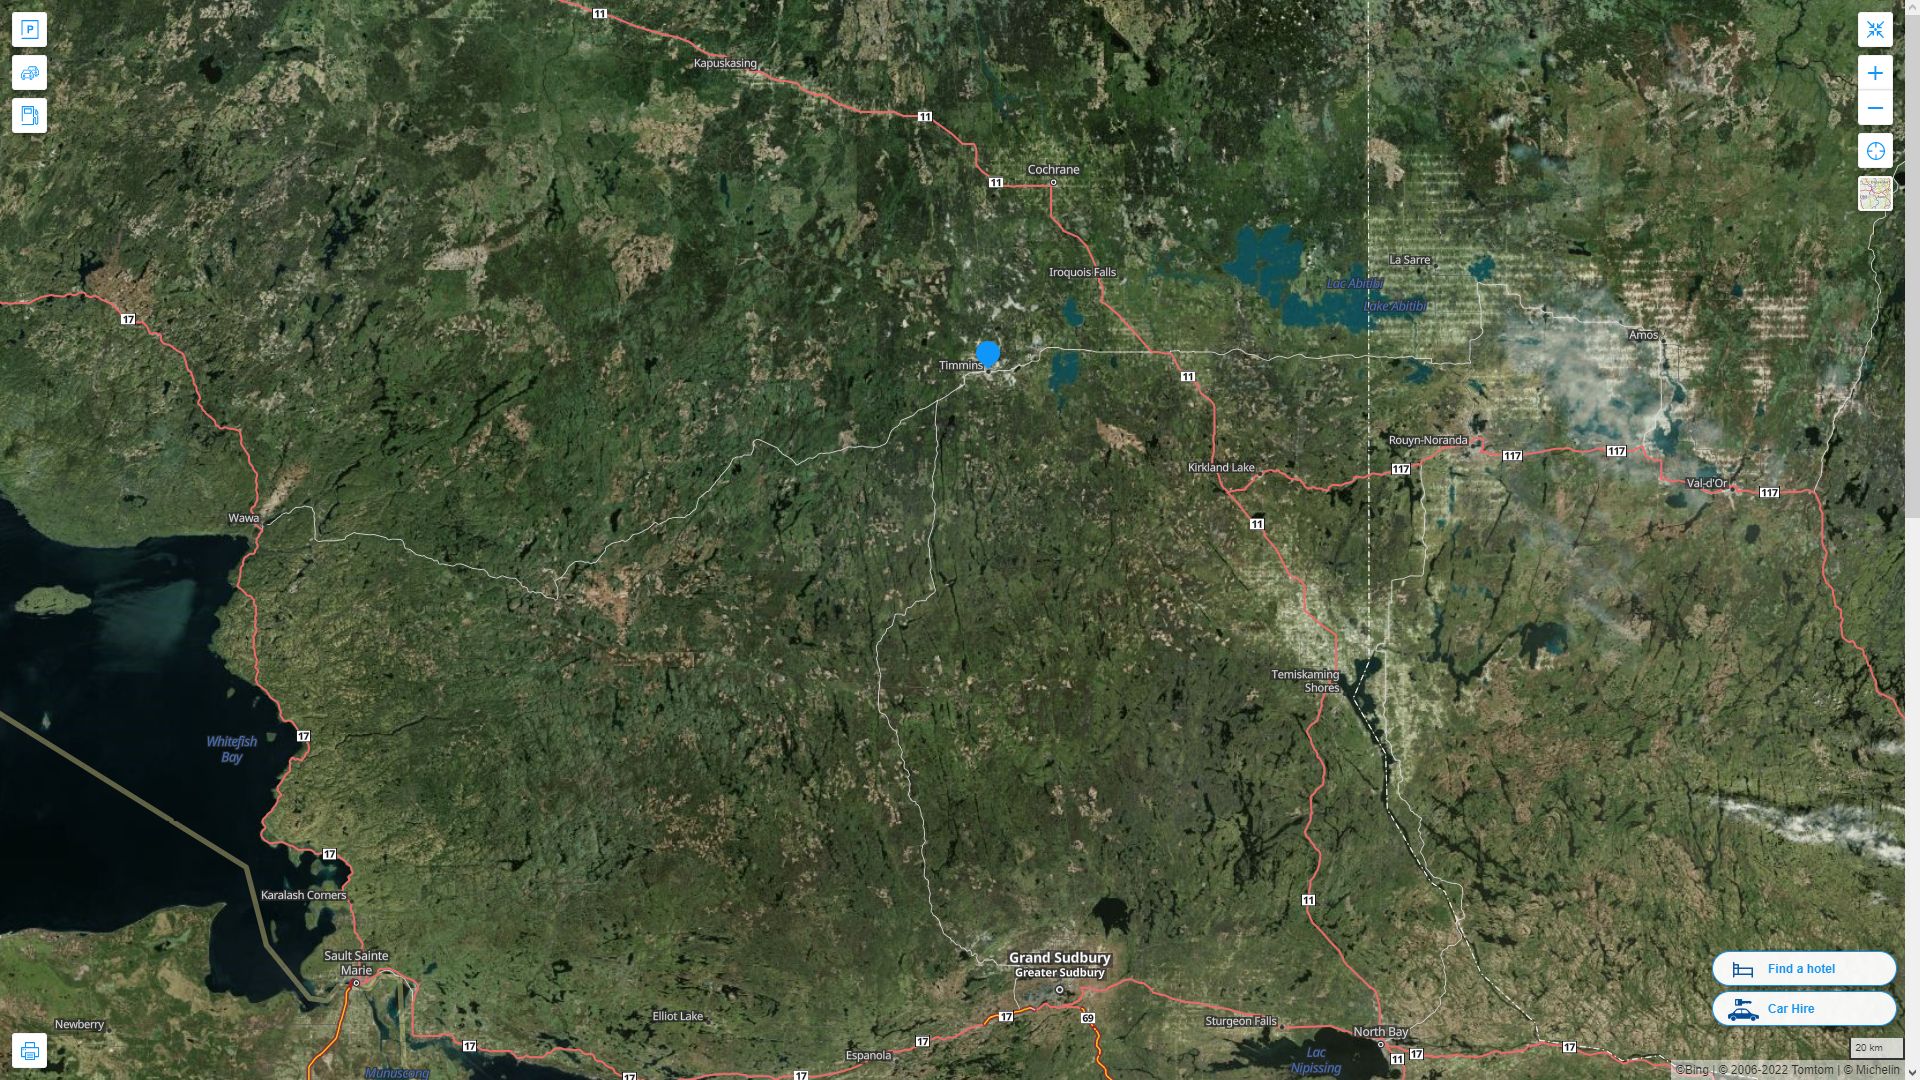 Timmins Highway and Road Map with Satellite View